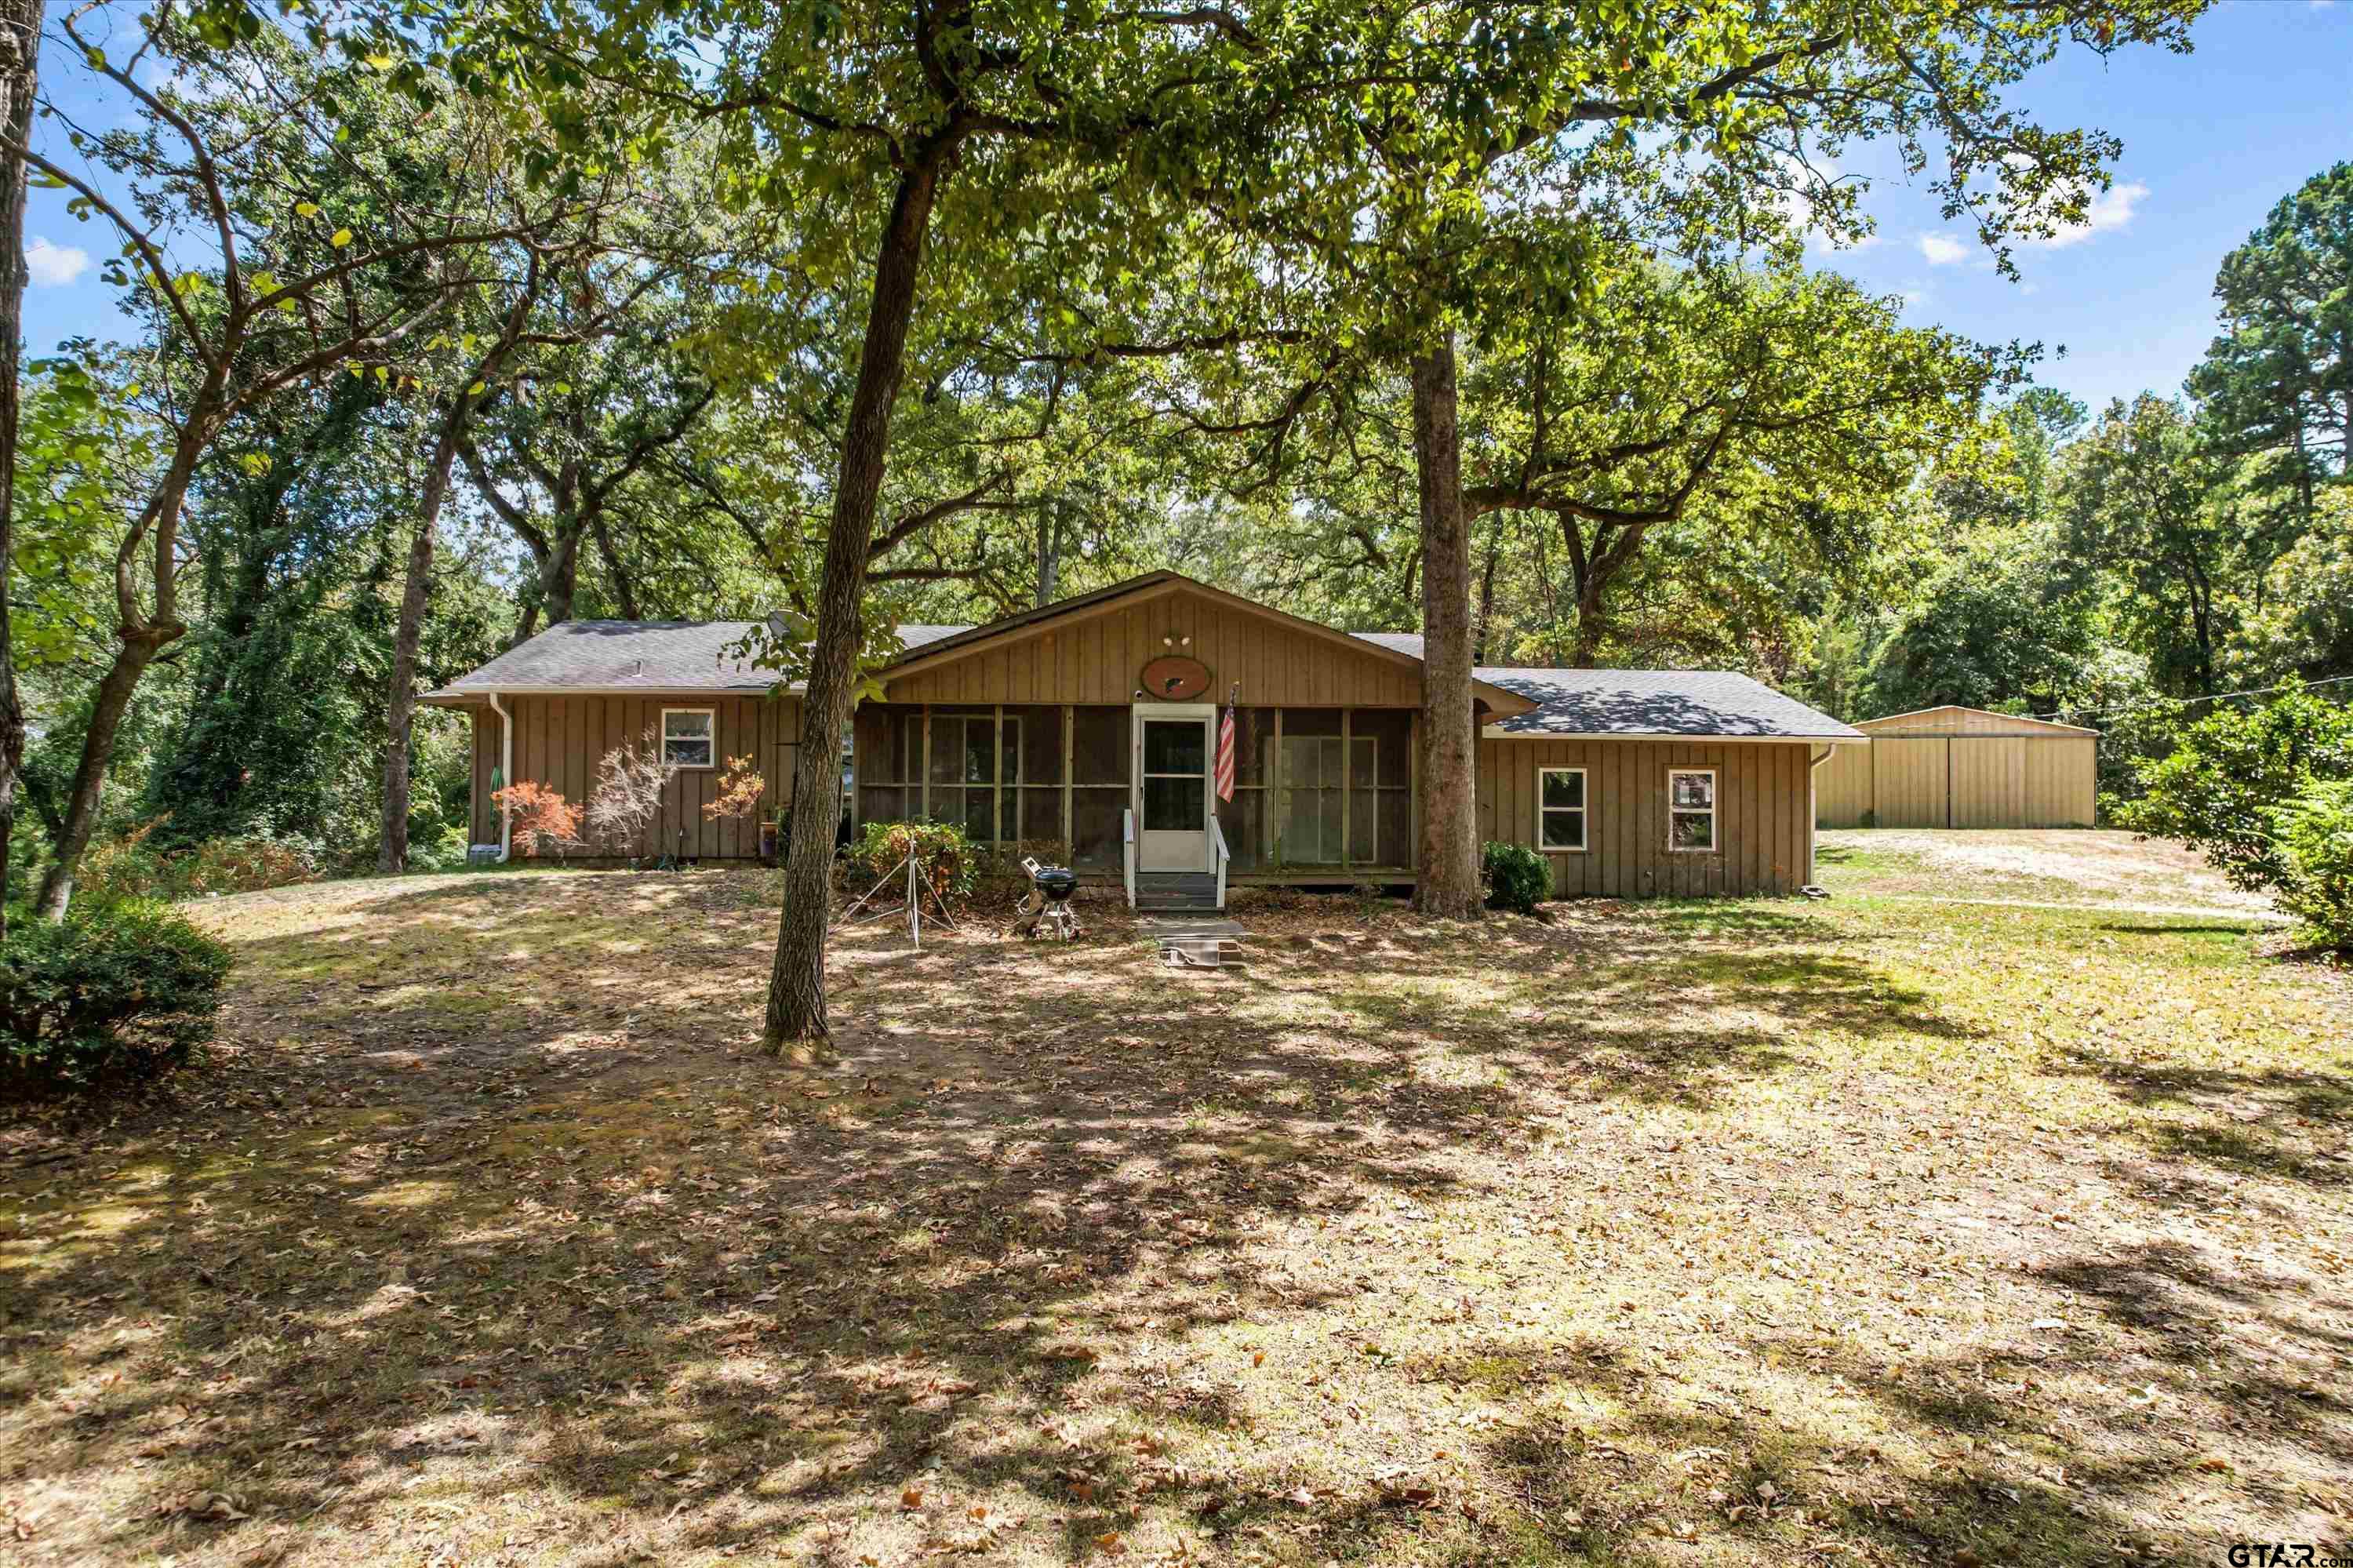 21090 Grove Club Lake Rd., Whitehouse, Texas 75791, 2 Bedrooms Bedrooms, ,2 BathroomsBathrooms,Single Family Detached,For Sale,Grove Club Lake Rd.,23012120